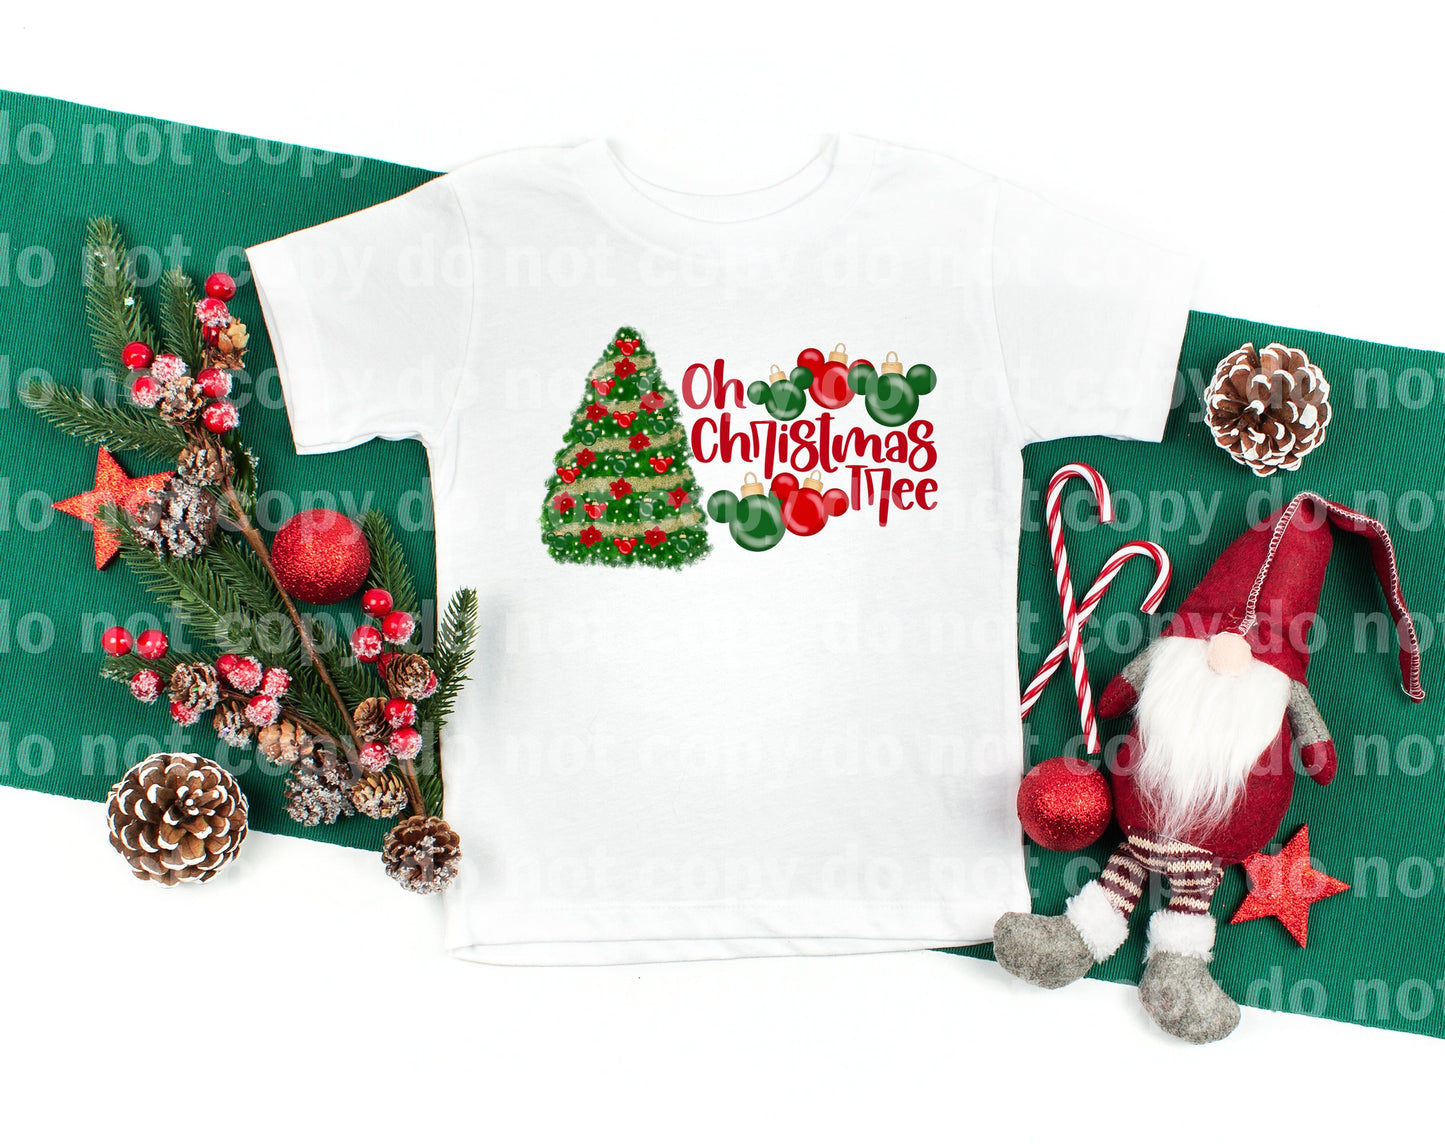 Oh Christmas Tree Dream Print or Sublimation Print